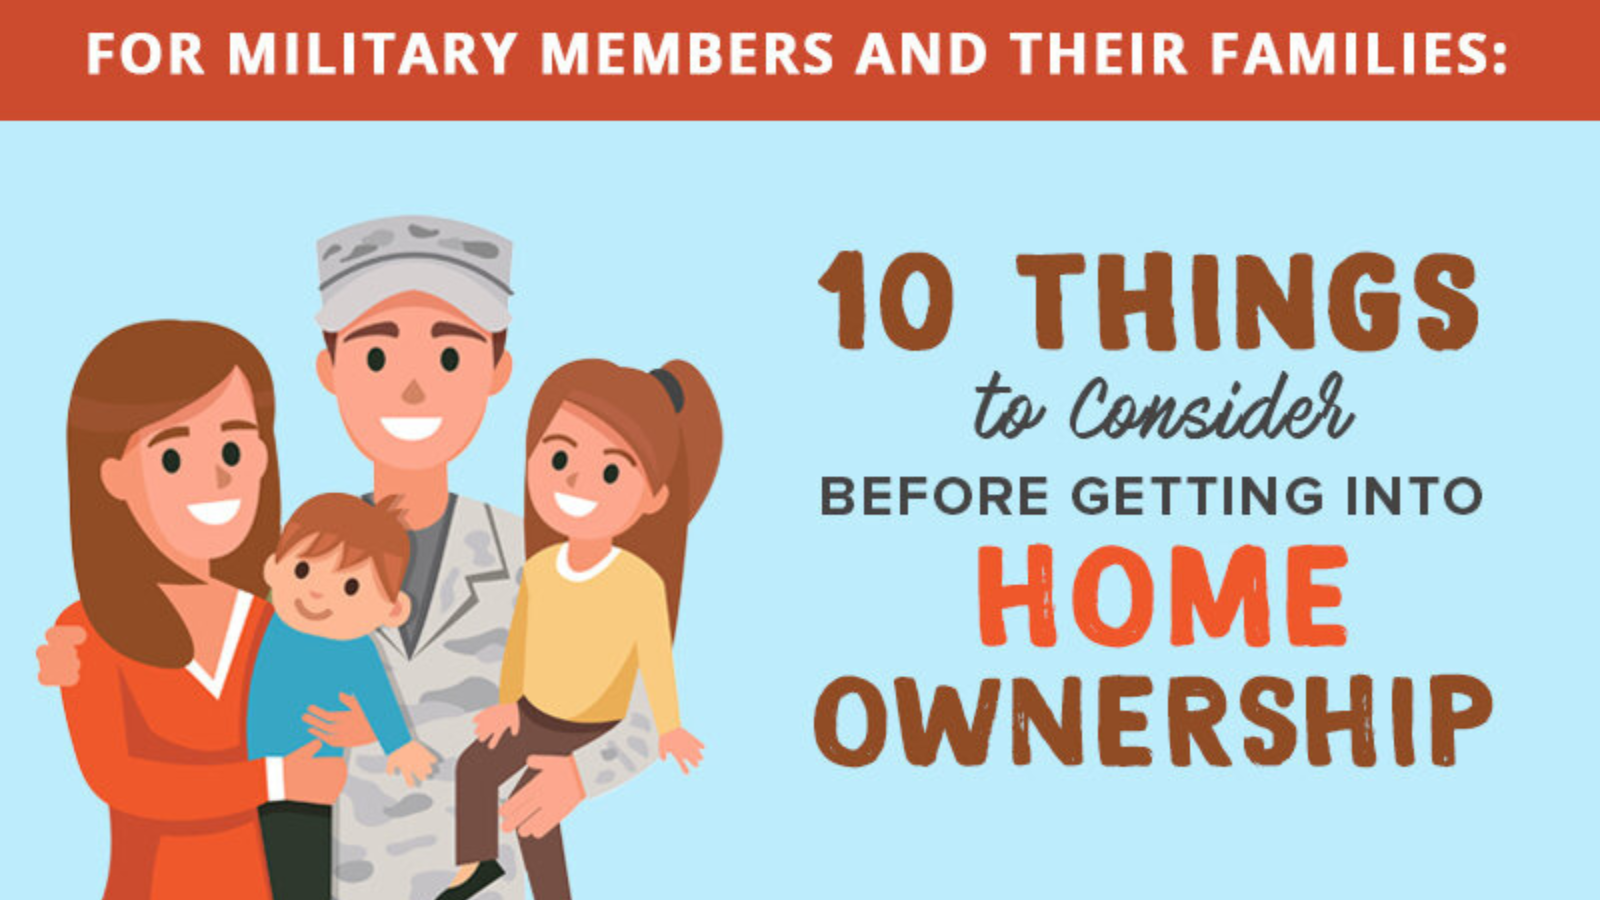 For Military Members and Their Families: 10 Things to Consider Before Getting Into Home Ownership